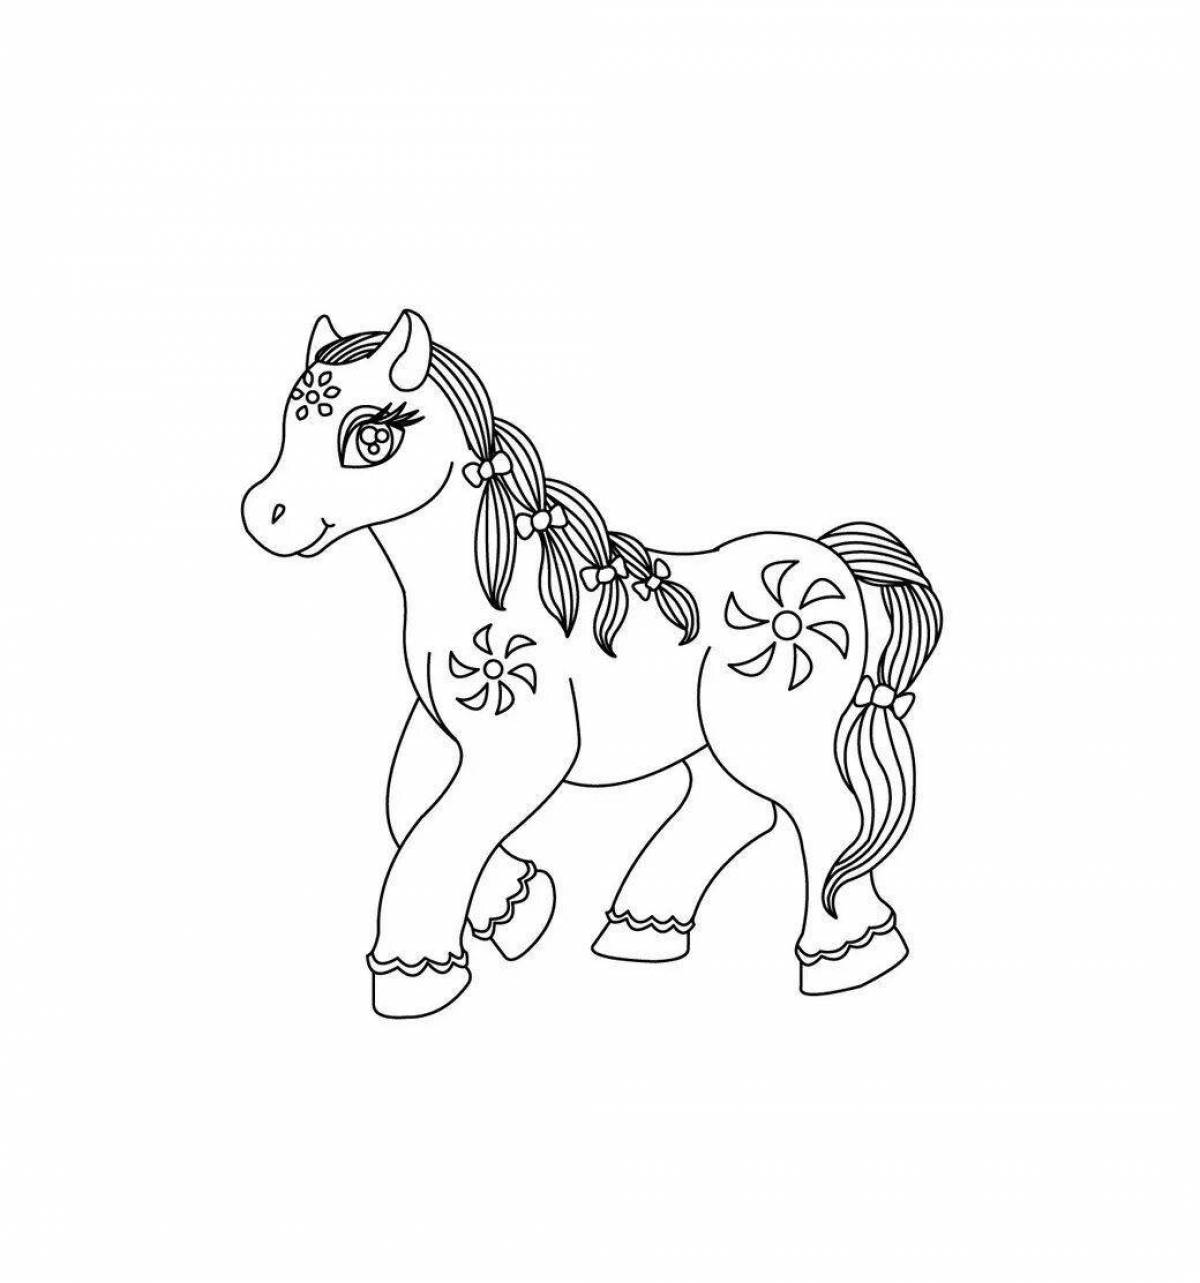 Coloring page beckoning Gzhel horse